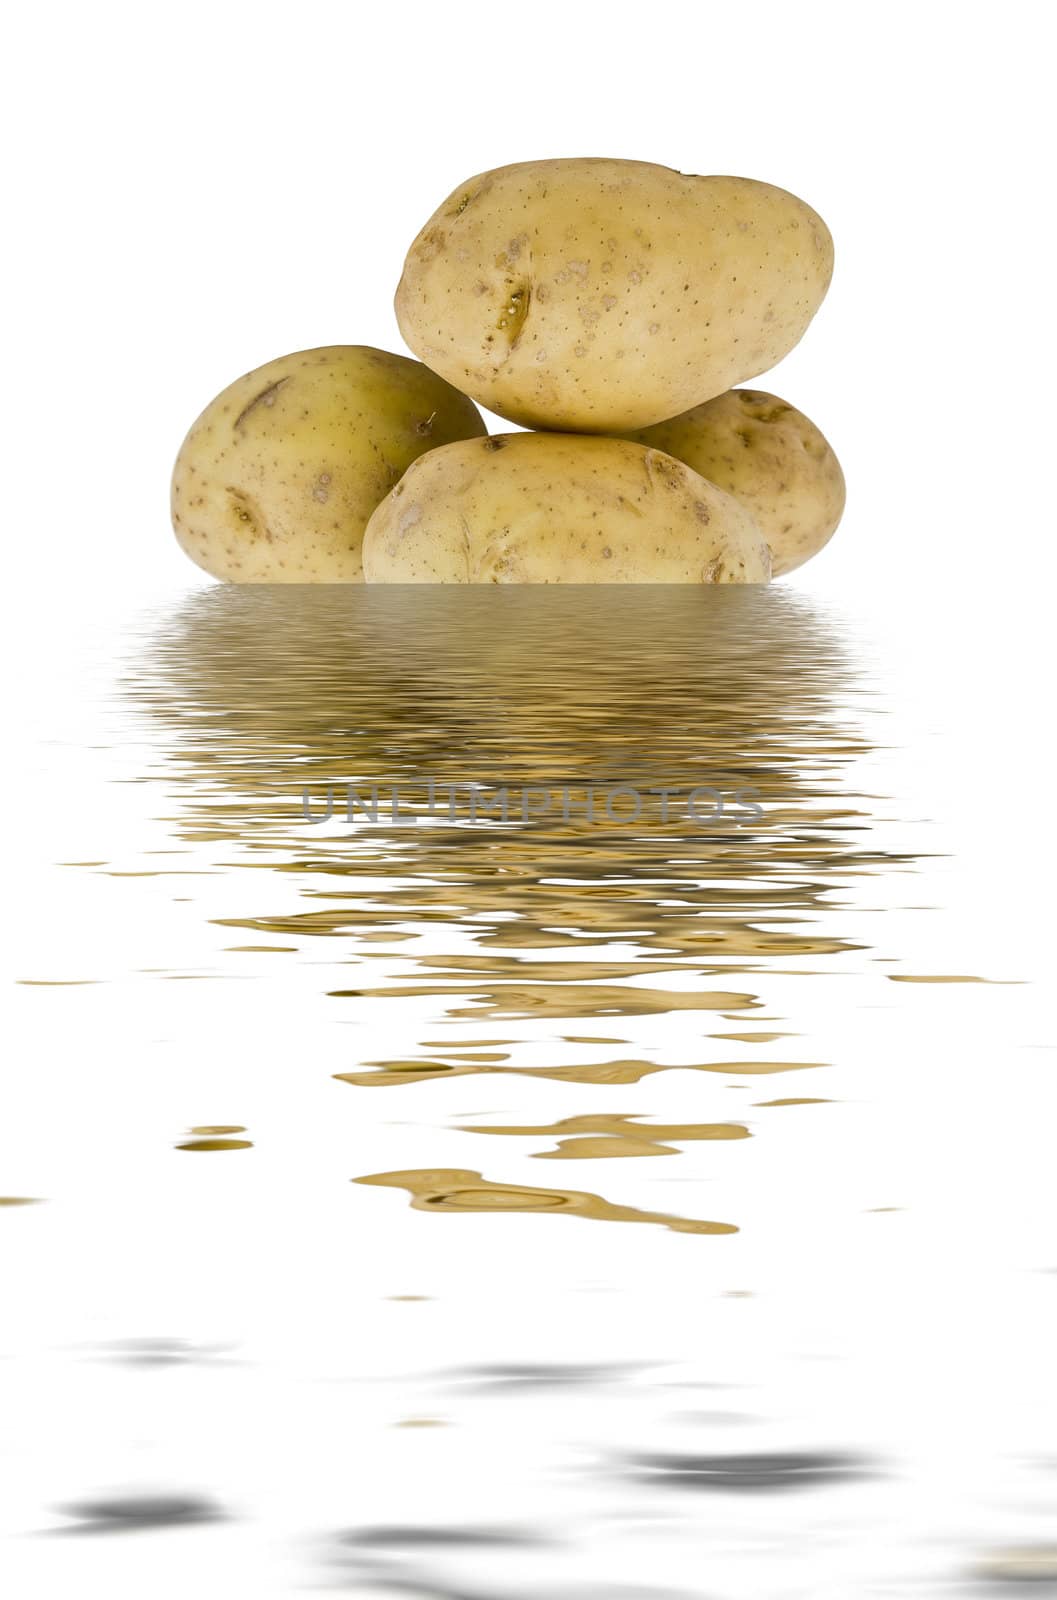 young potatoes in the water by furzyk73